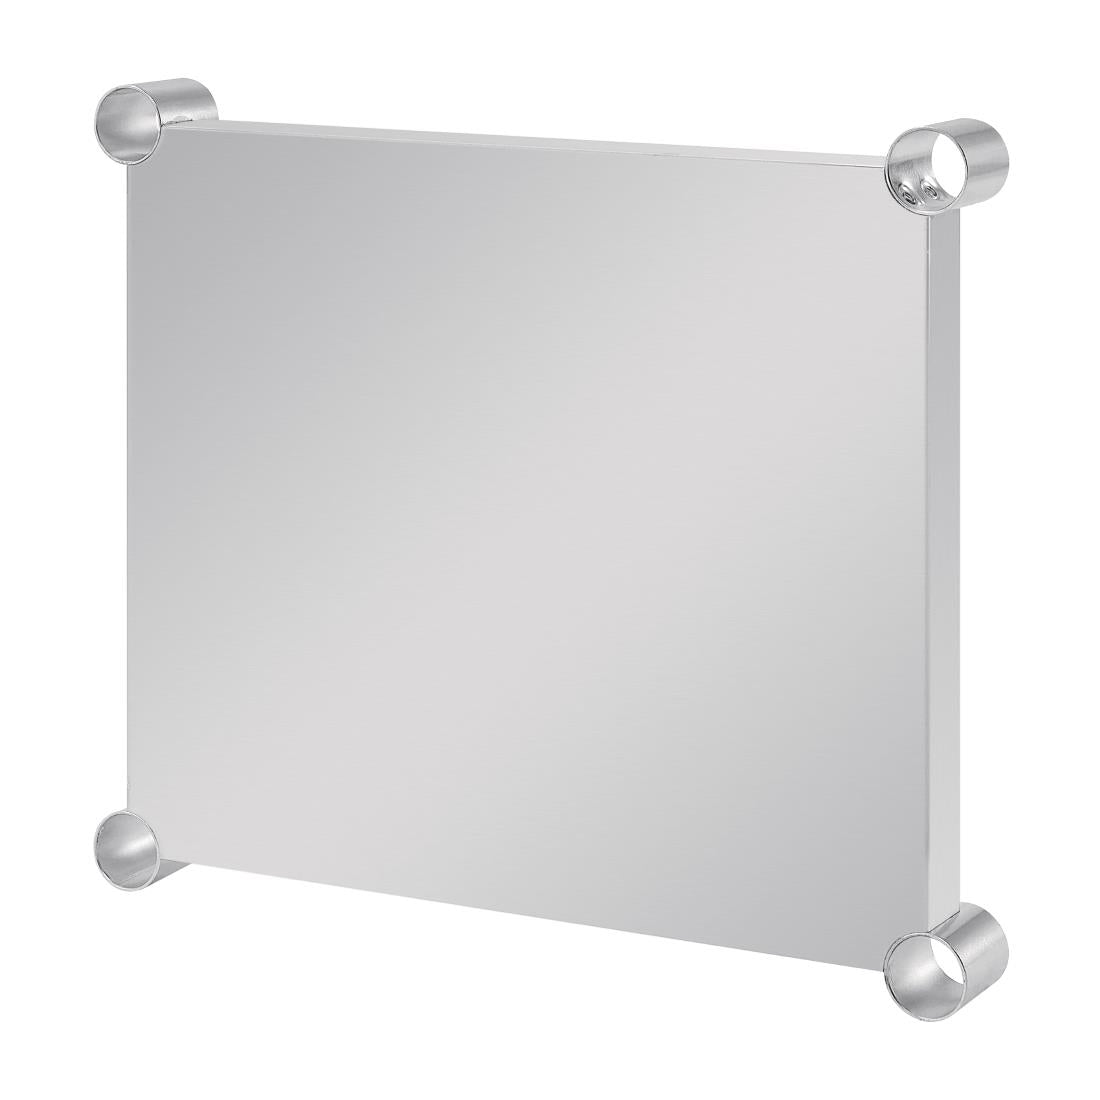 CP830 Vogue Steel Table Shelf 600x600mm JD Catering Equipment Solutions Ltd